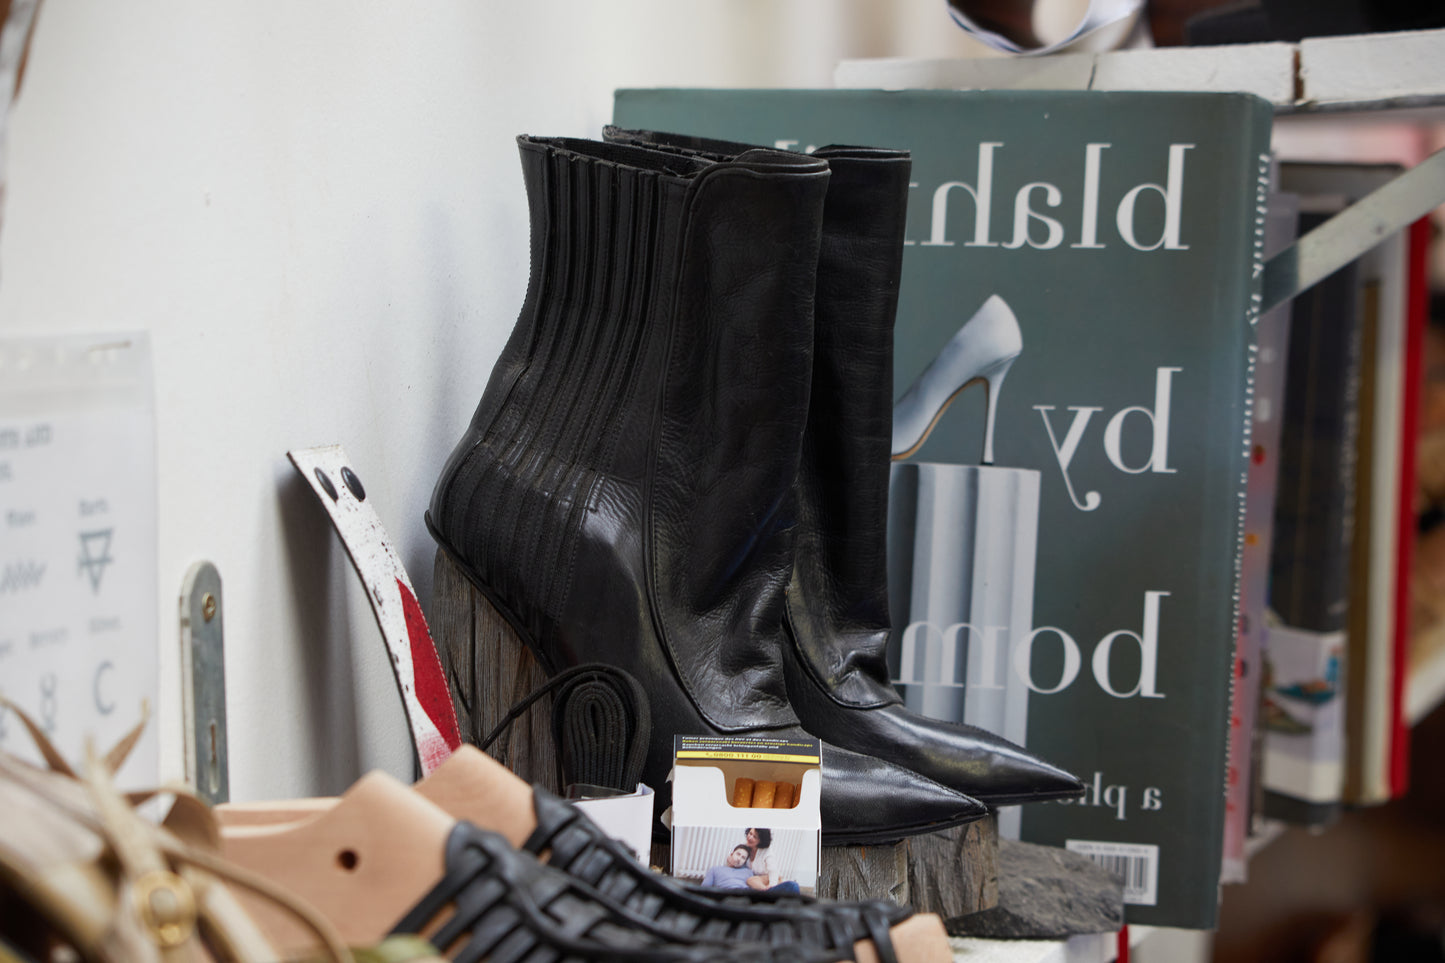 ANKLE BOOTS⎟VOODOO⎟FOR P.S.